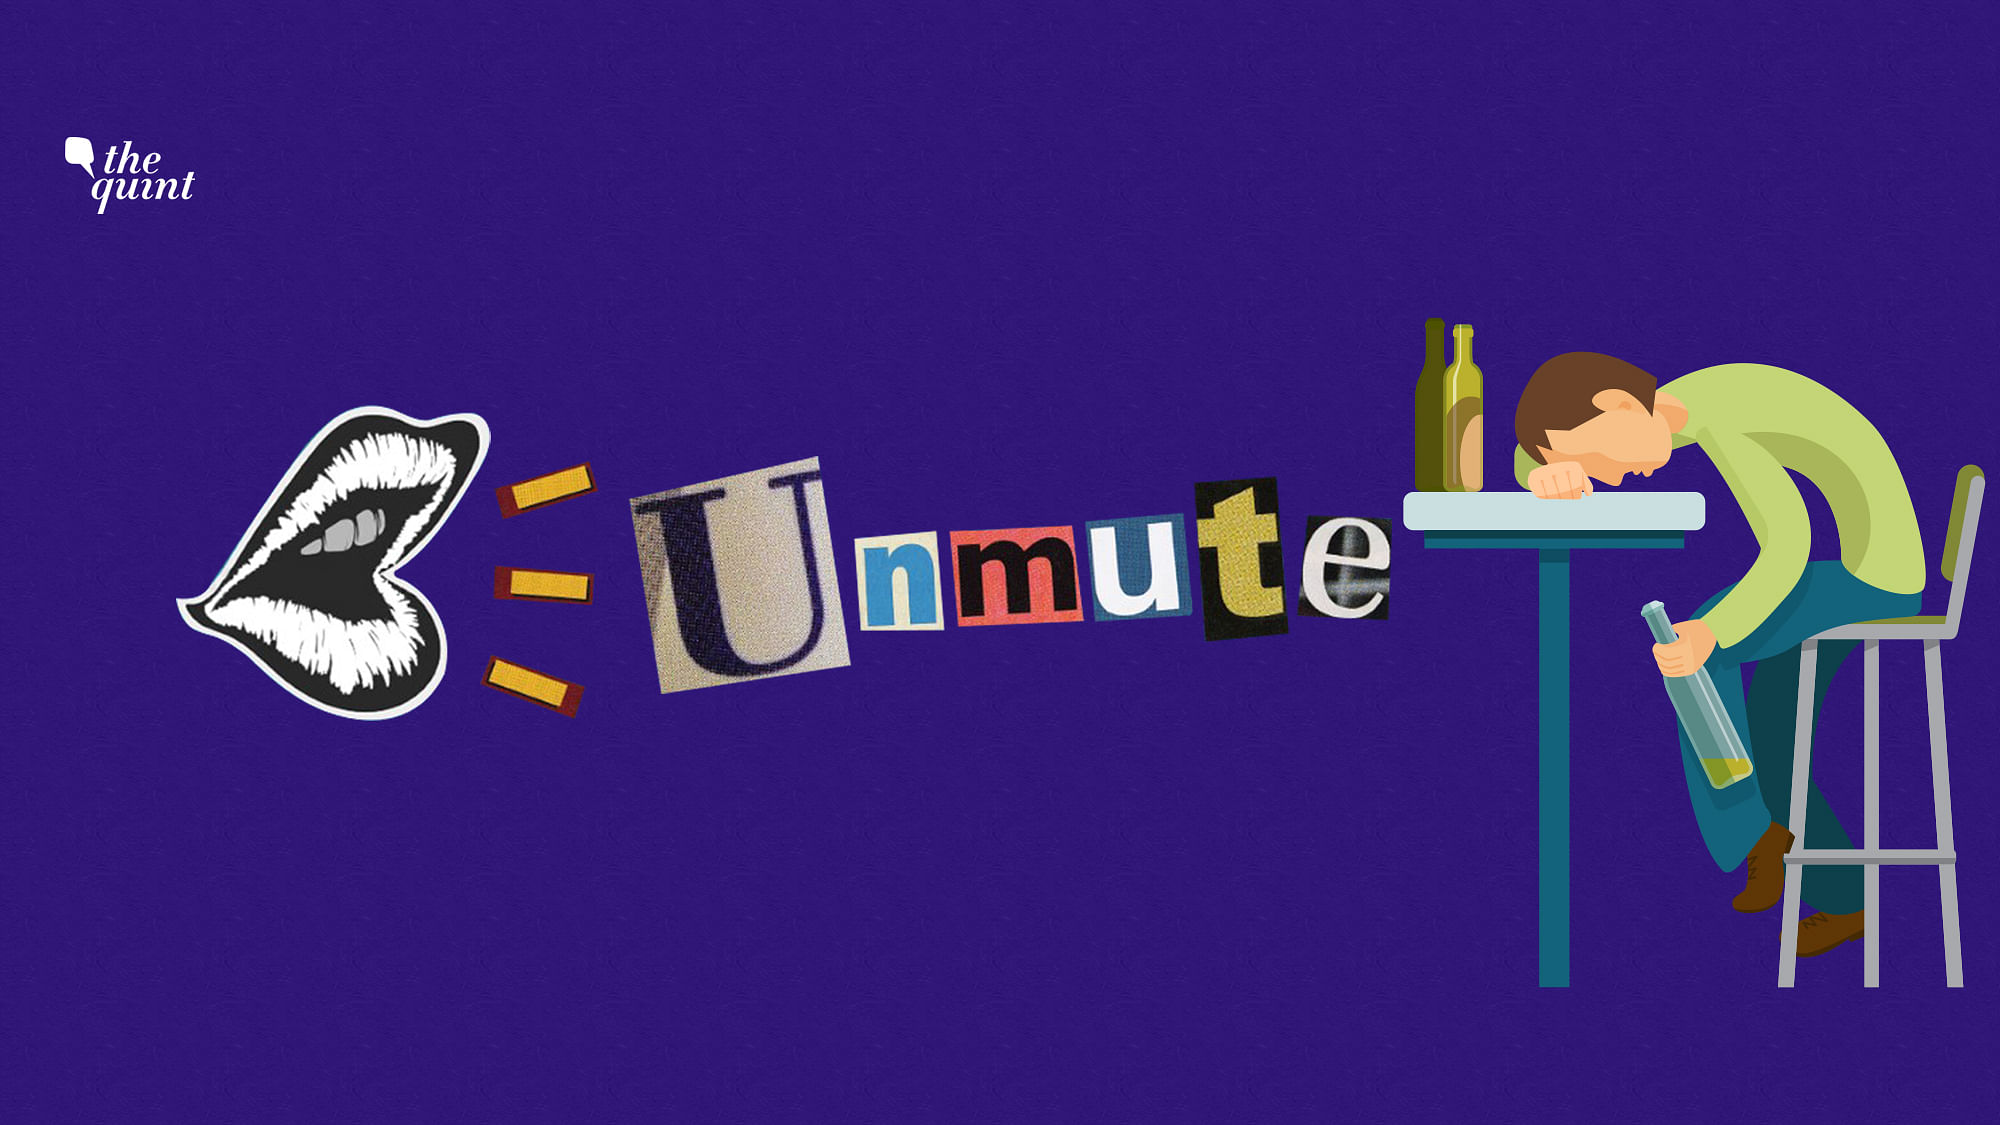 In this episode of Unmute, we talk to people living and dealing with alcoholism, and find out what it’s like to overcome or lose your life to alcohol addiction.